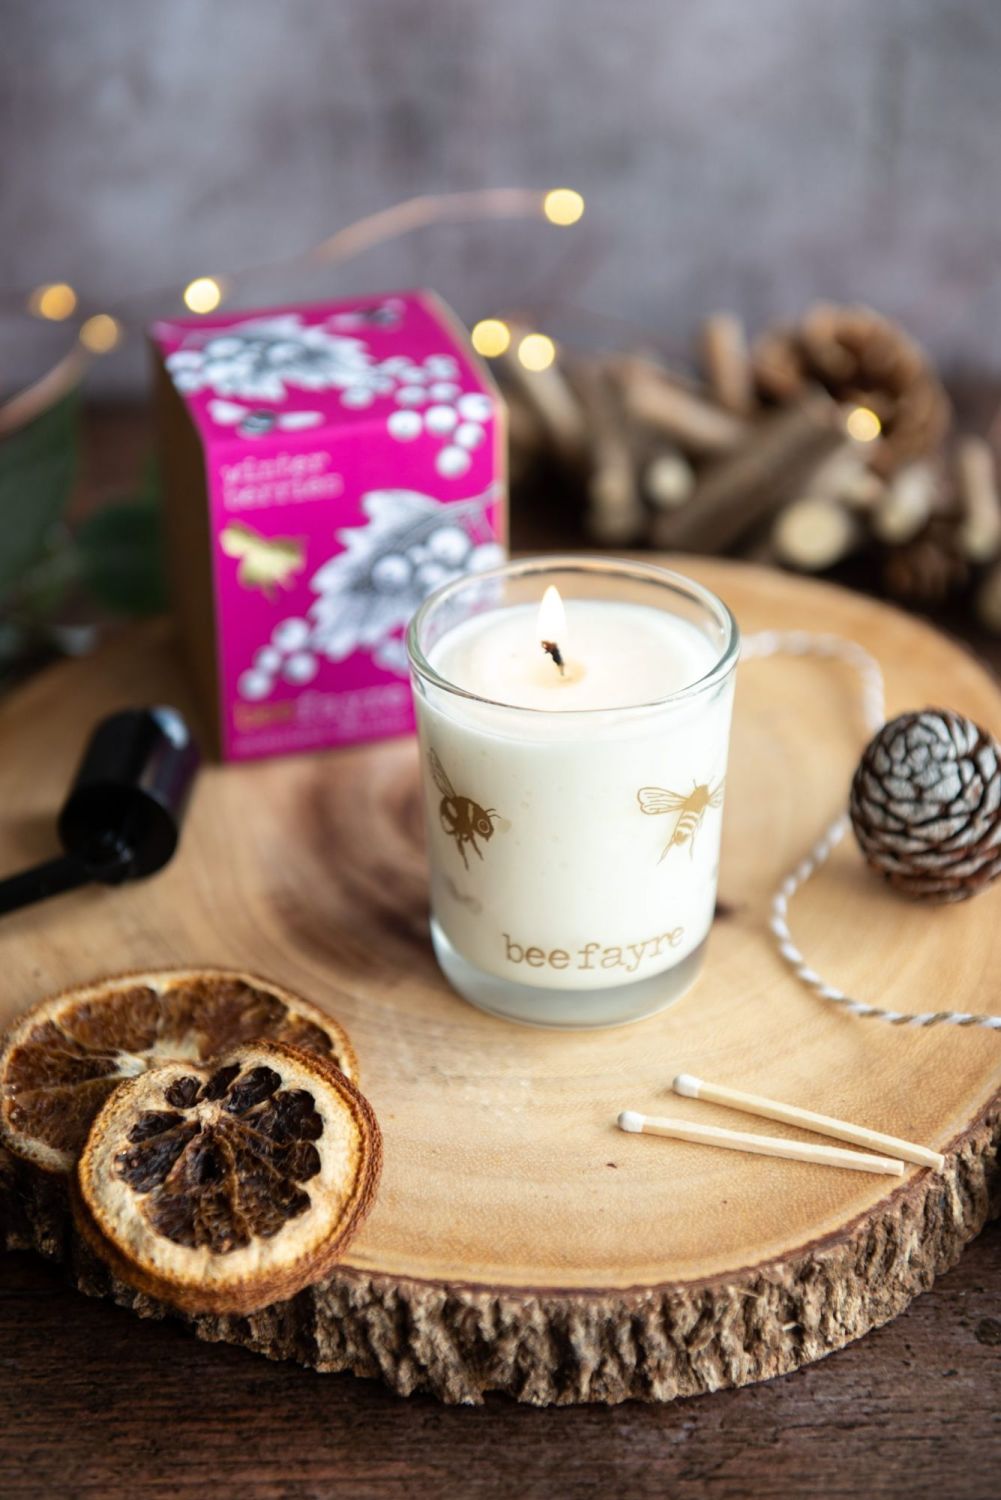 Winter Berries Votive Candle